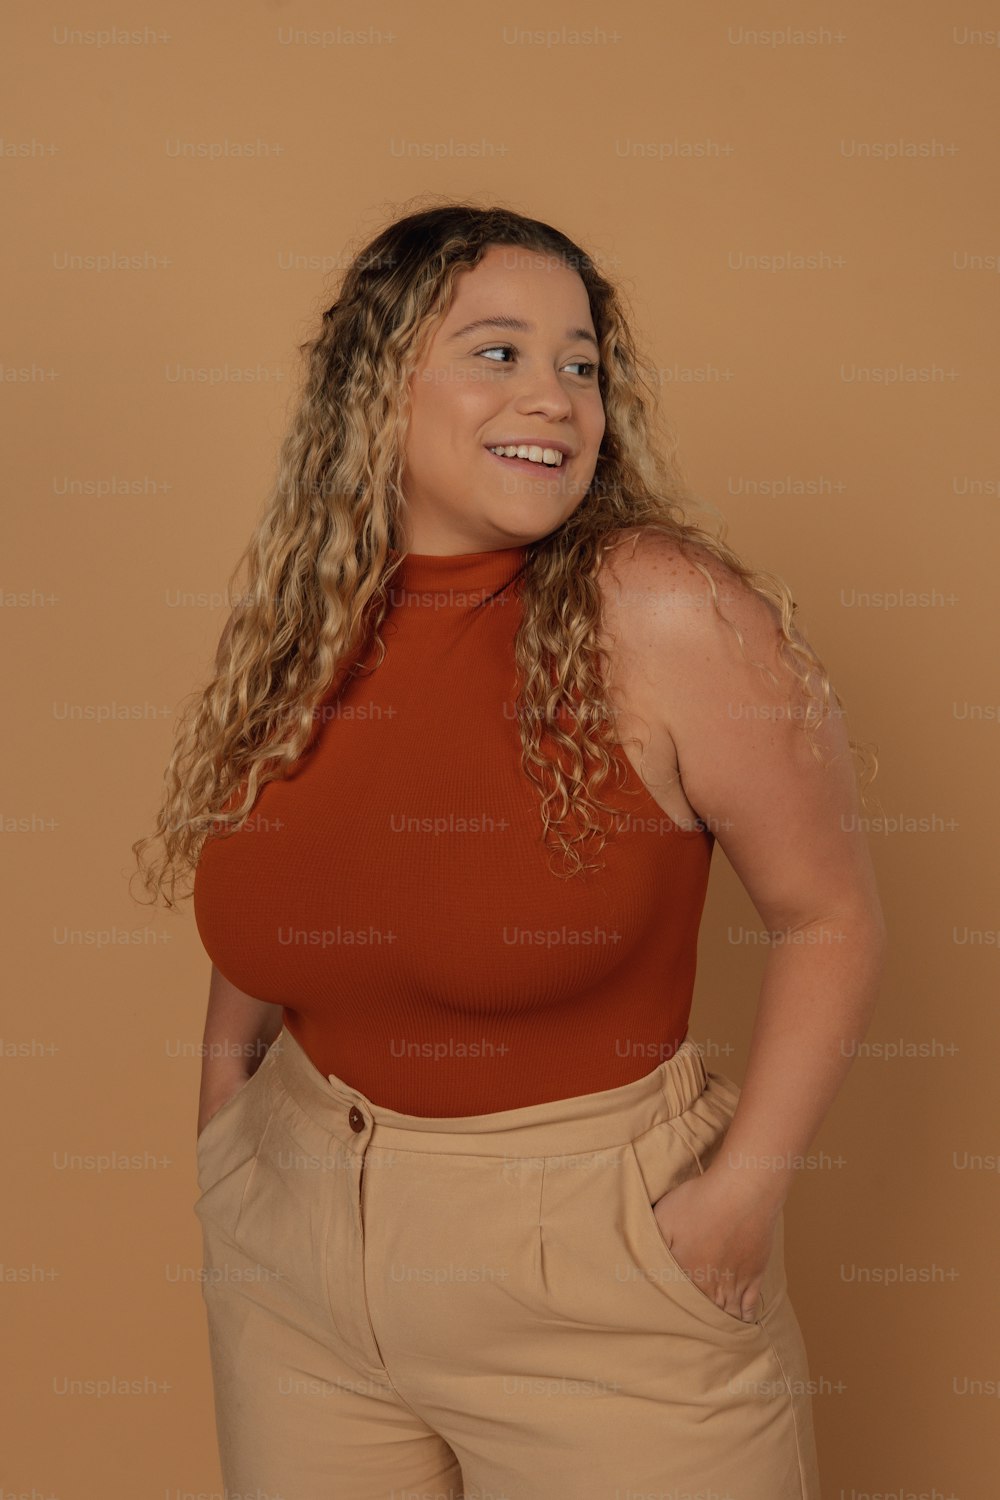 a woman wearing a red top and tan pants